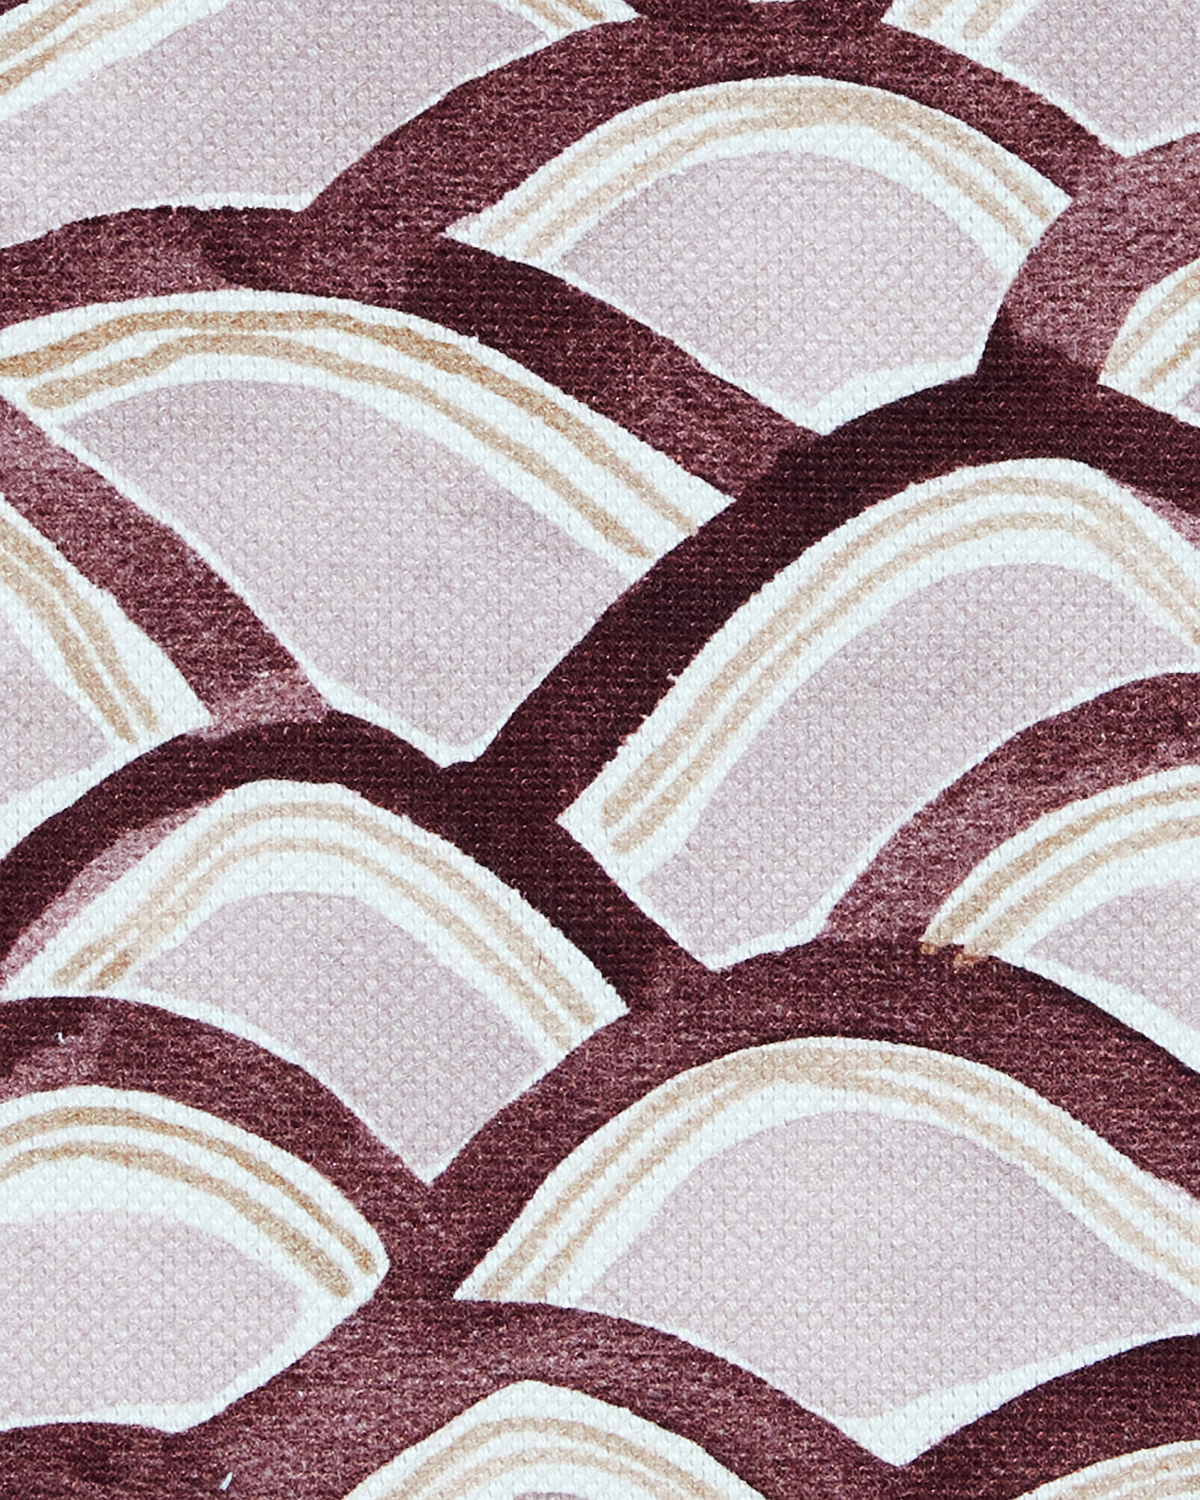 Mountains Fabric in Plum